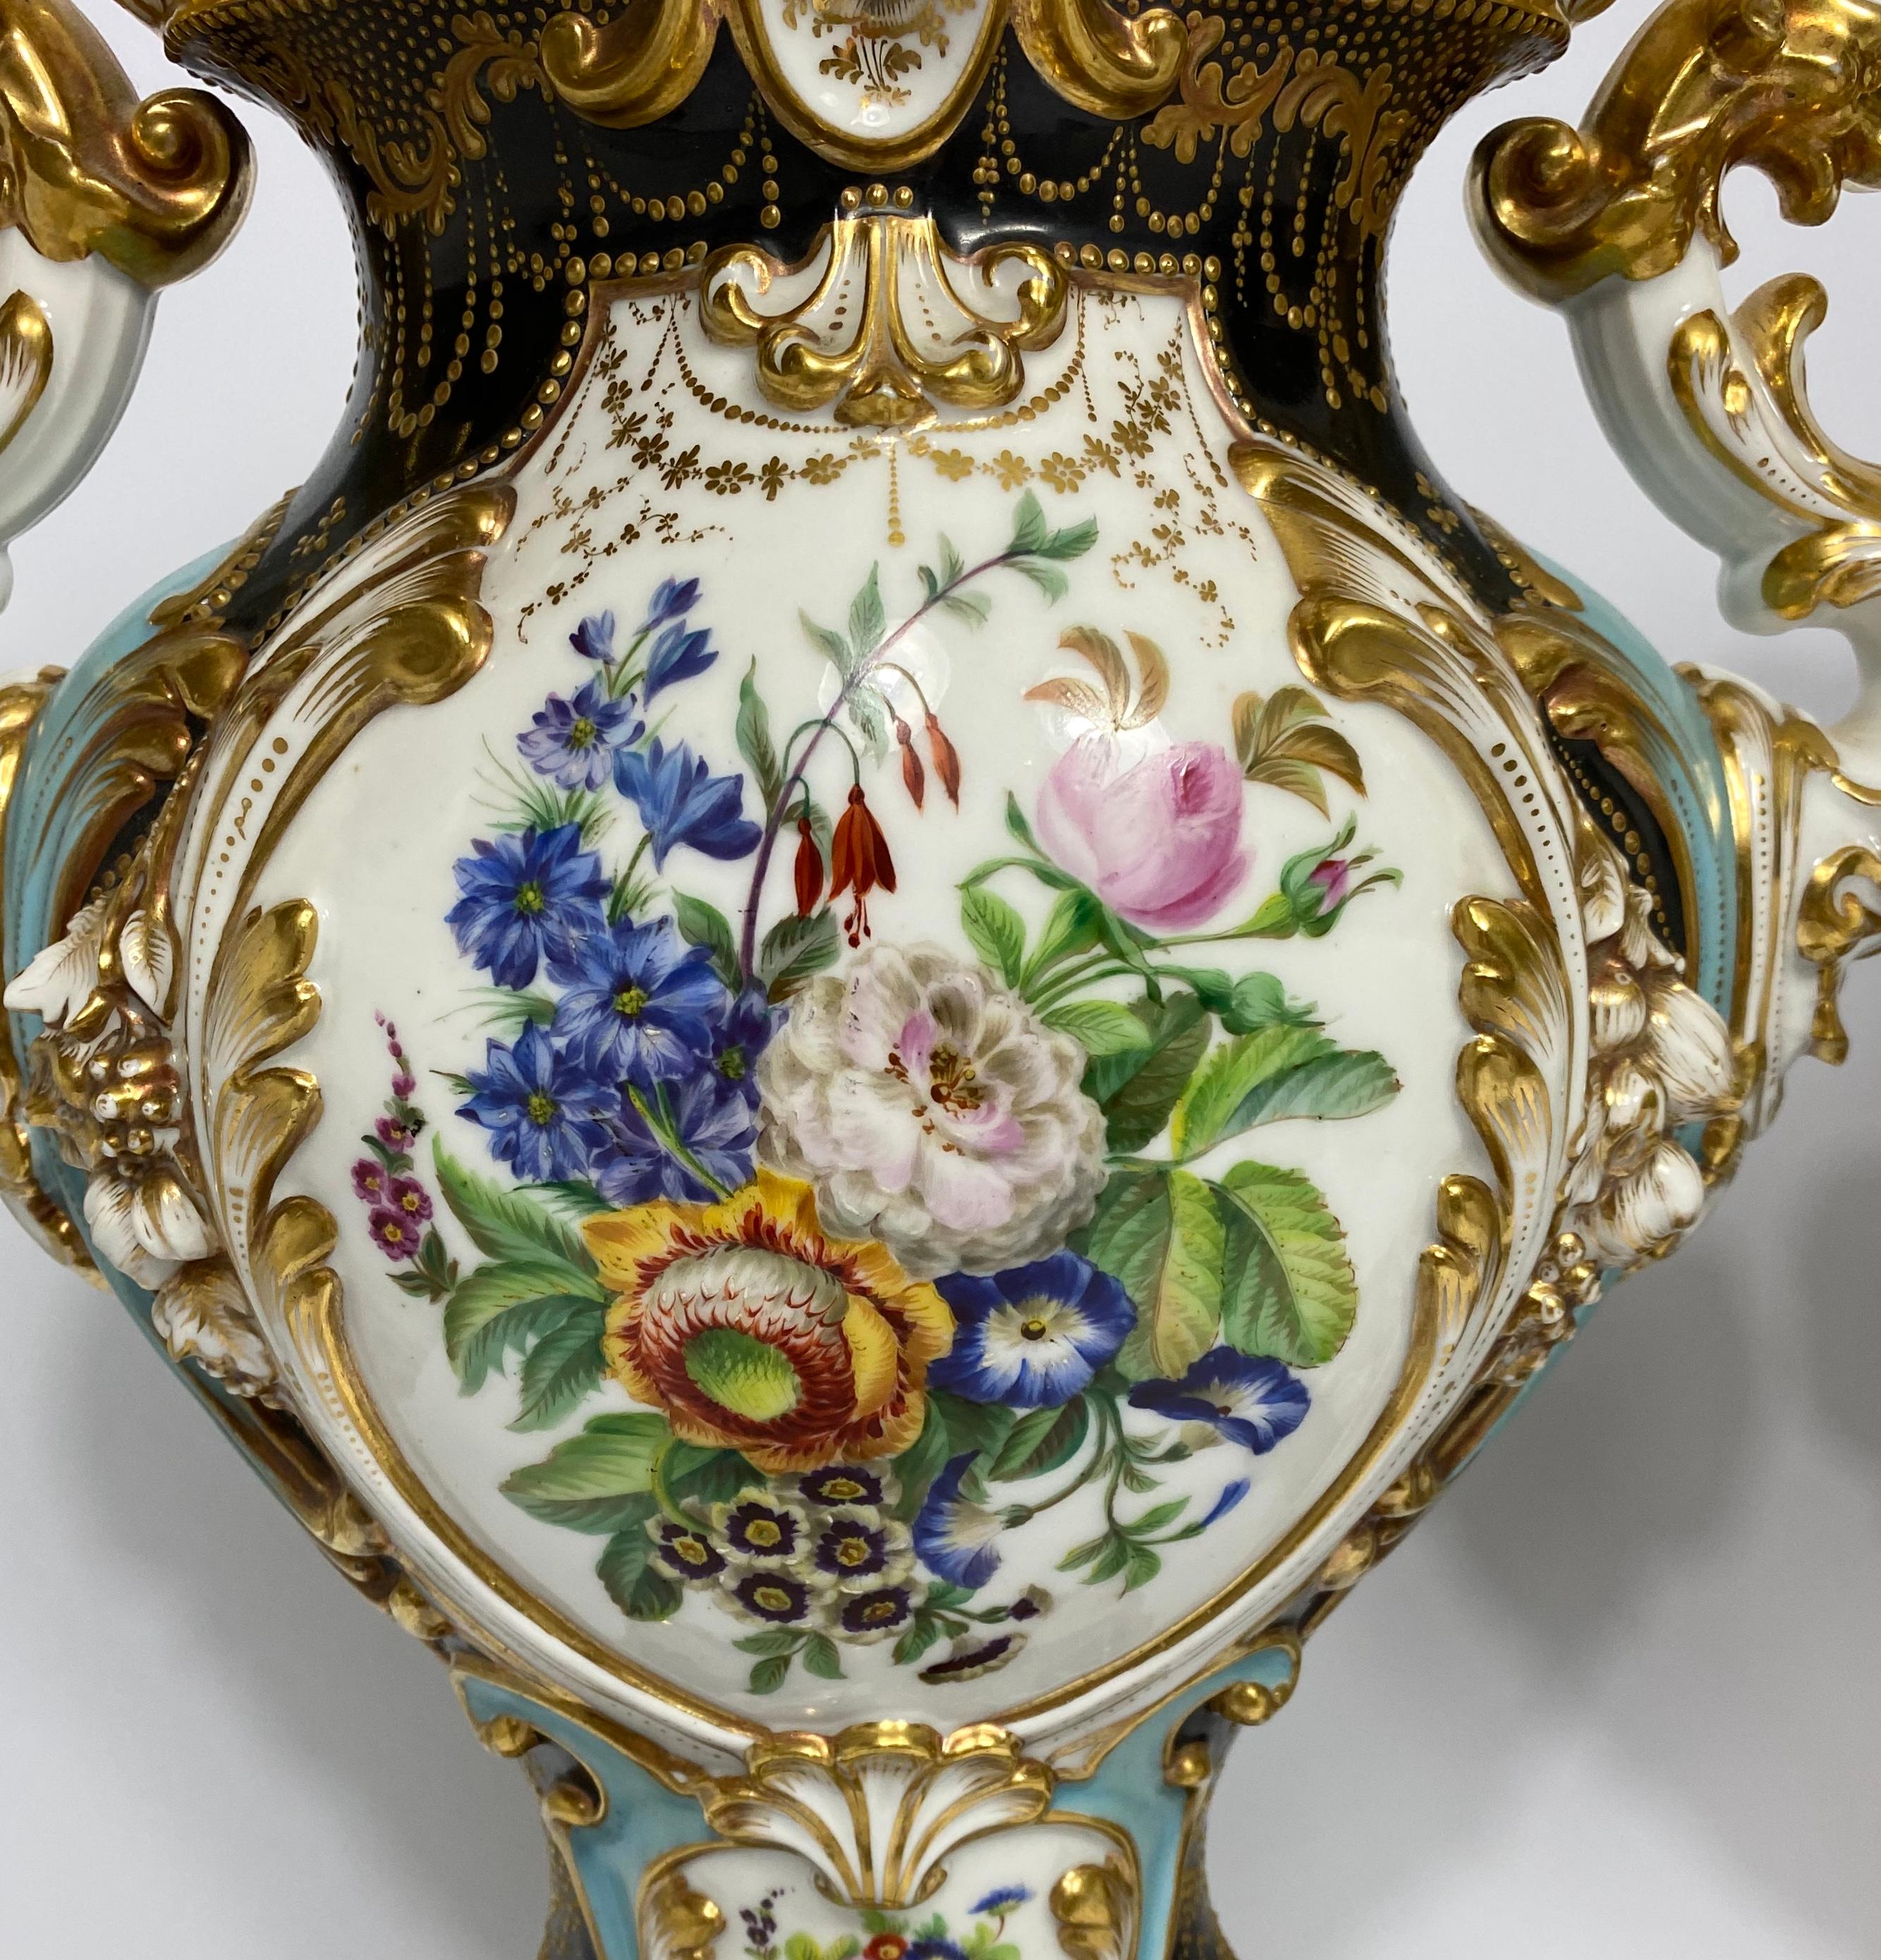 Fired Pair of French Porcelain Vases, Probably Jacob Petit, circa 1840